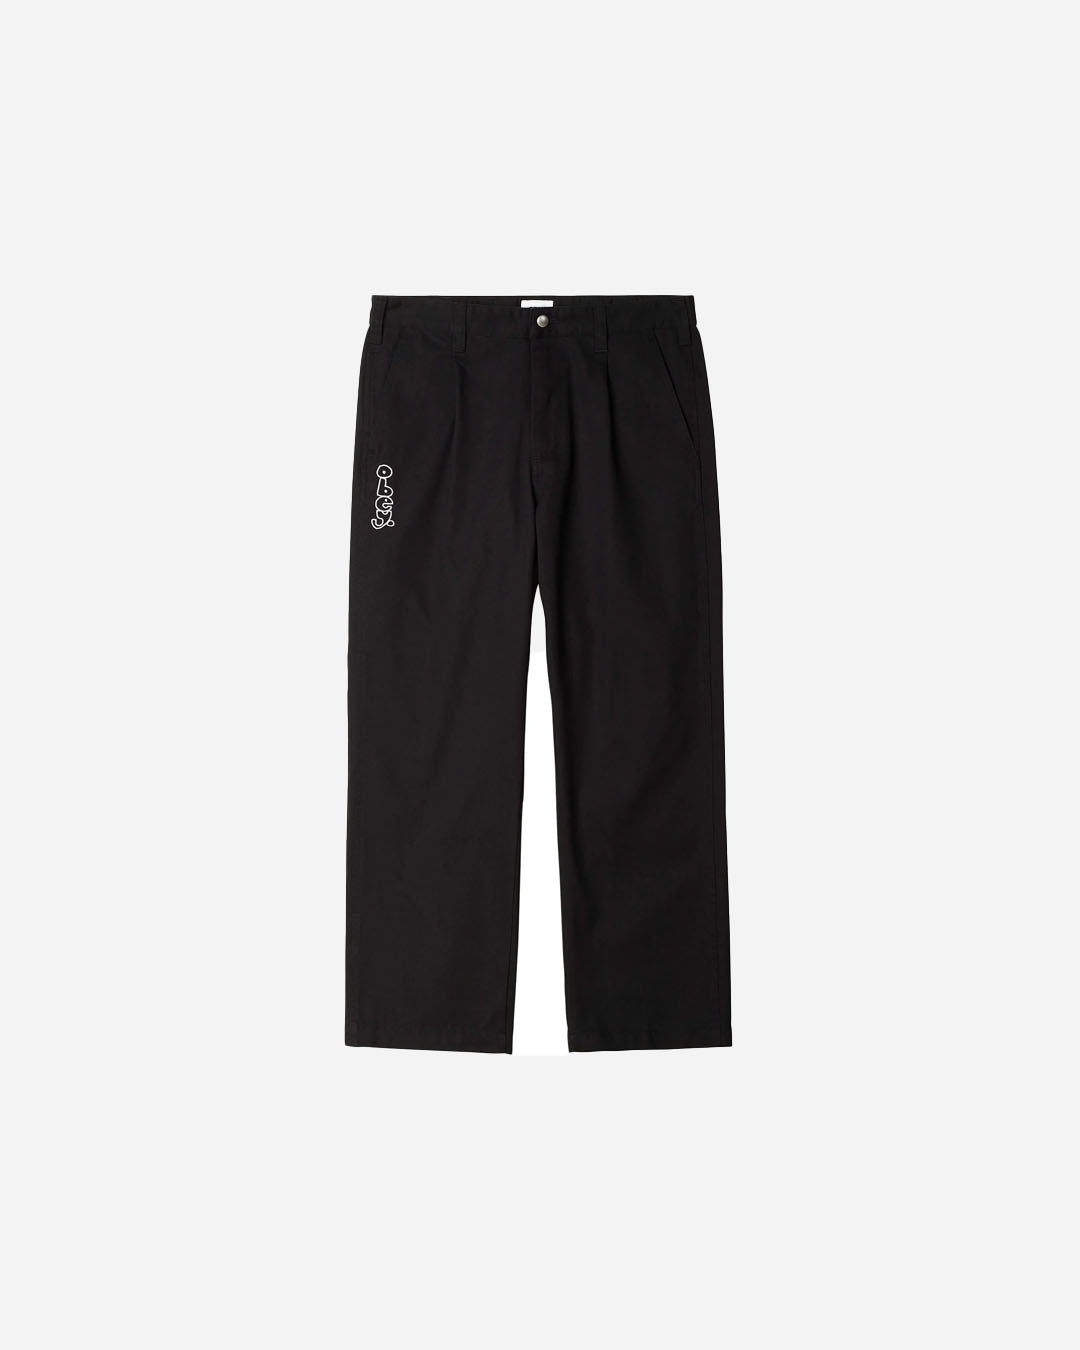 ESTATE EMBROIDERED PANT